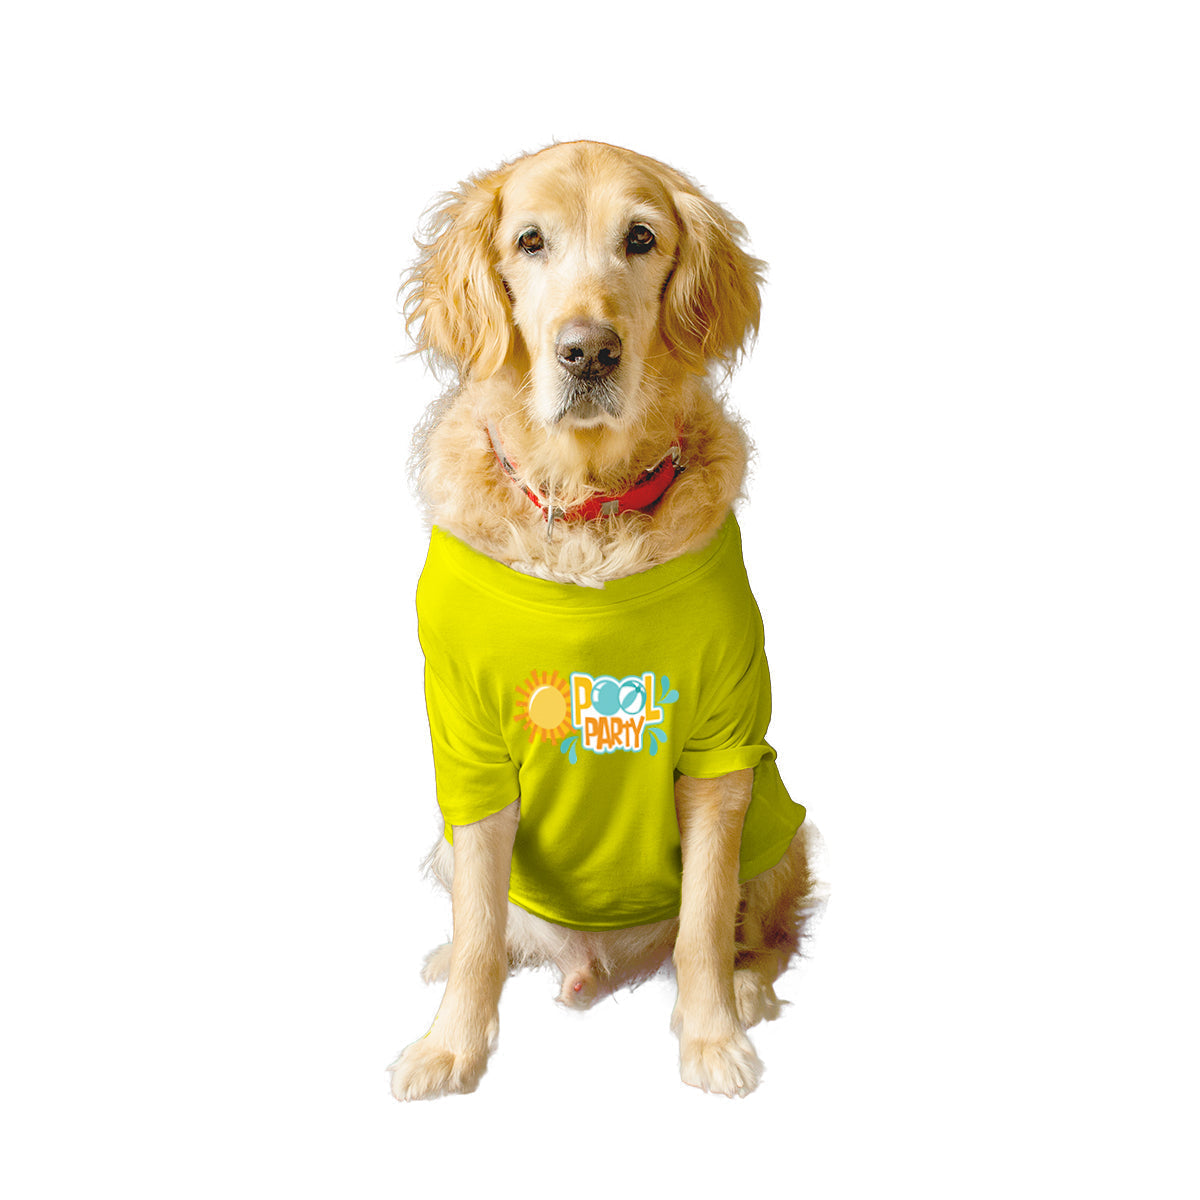 Ruse XX-Small (Chihuahuas, Papillons) / Yellow Ruse Basic Crew Neck 'Pool Party' Printed Half Sleeves Dog Tee1